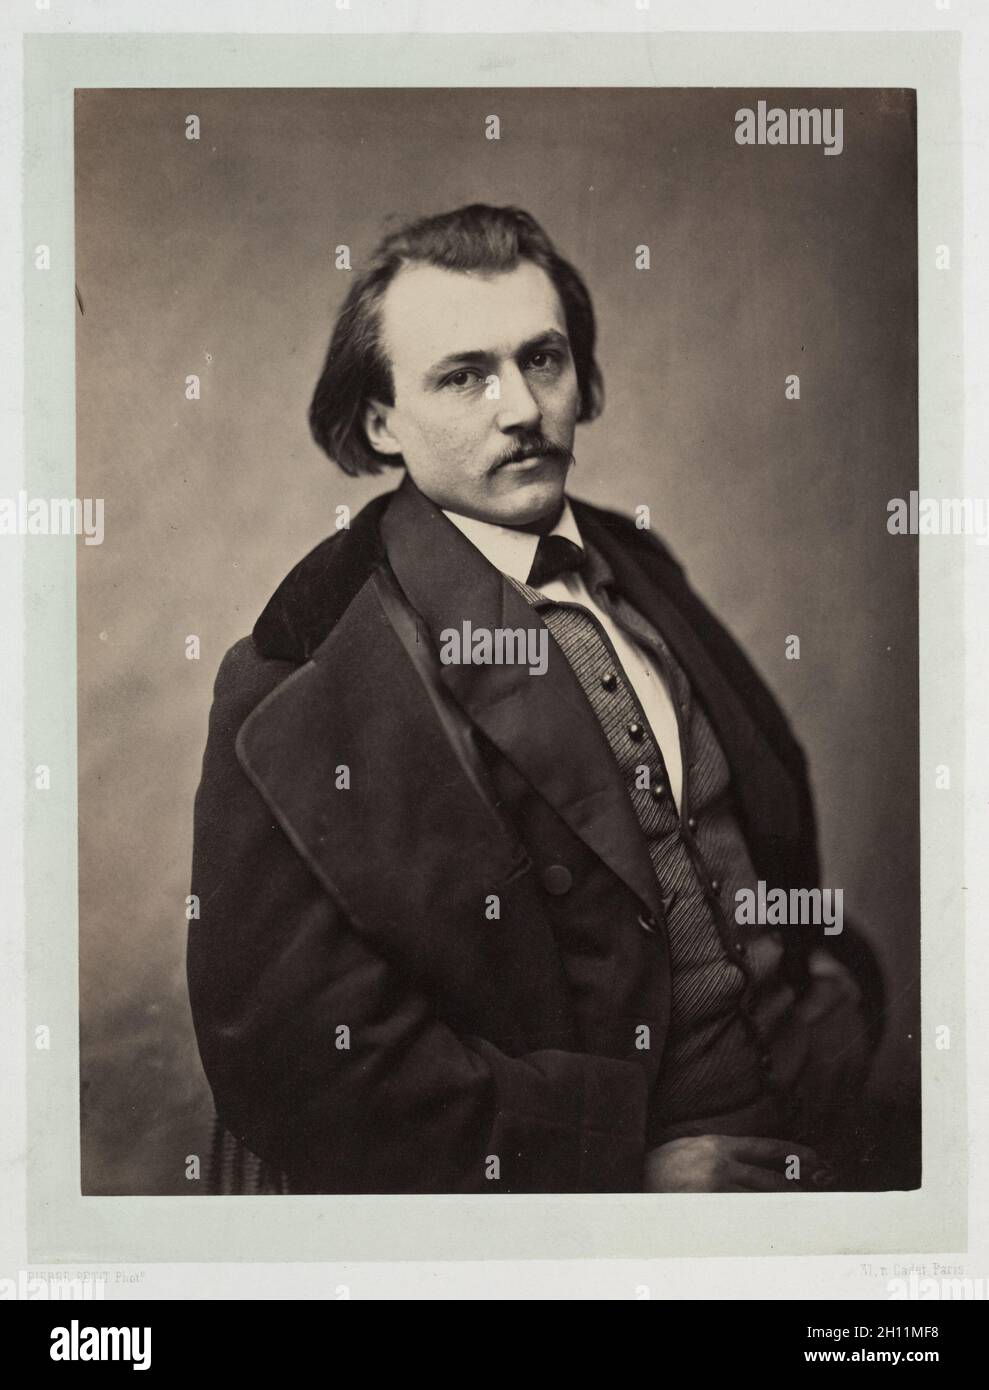 Gustave Doré, 1860. Pierre Petit (French, 1832-1909). Albumen print from wet collodion negative; image: 25 x 19 cm (9 13/16 x 7 1/2 in.); paper: 48.1 x 31 cm (18 15/16 x 12 3/16 in.); matted: 55.9 x 45.7 cm (22 x 18 in.). Stock Photo